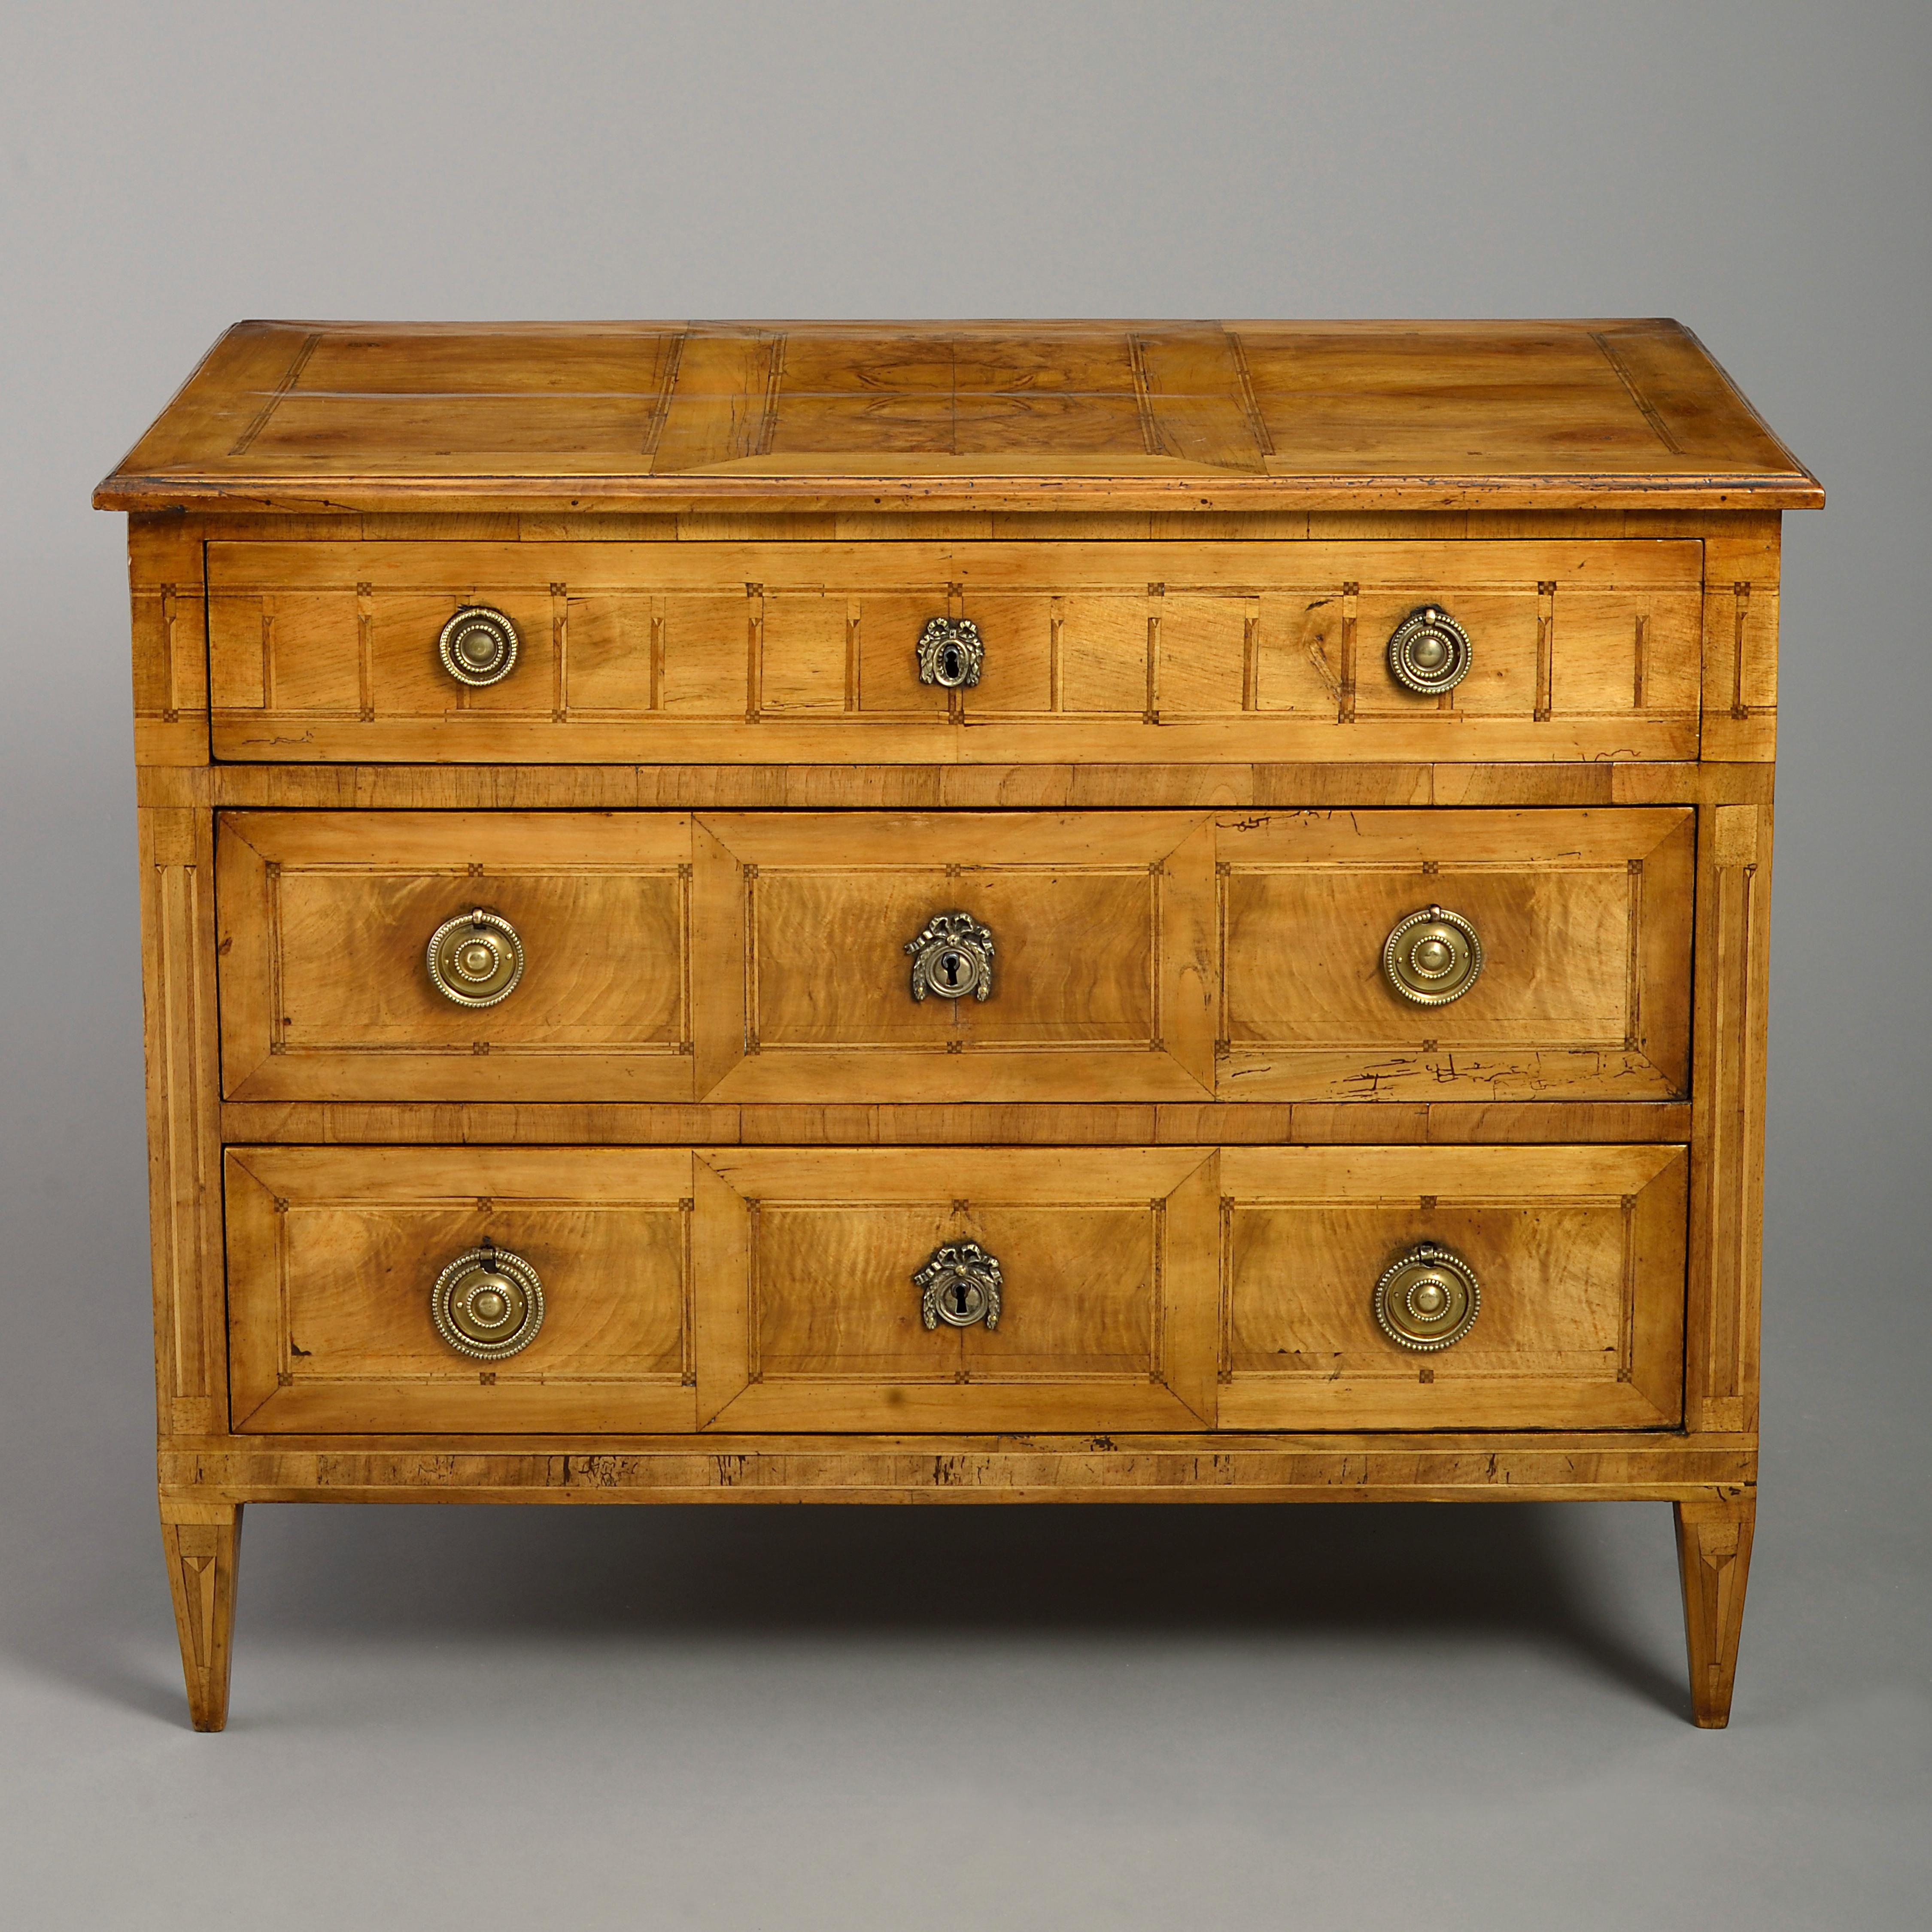 A late 18th century Louis XVI period neoclassical walnut veneered commode, the top with parquetry panelling above three drawers with of the same with brass lock escutcheons and medallion handles, terminating in square tapering feet.